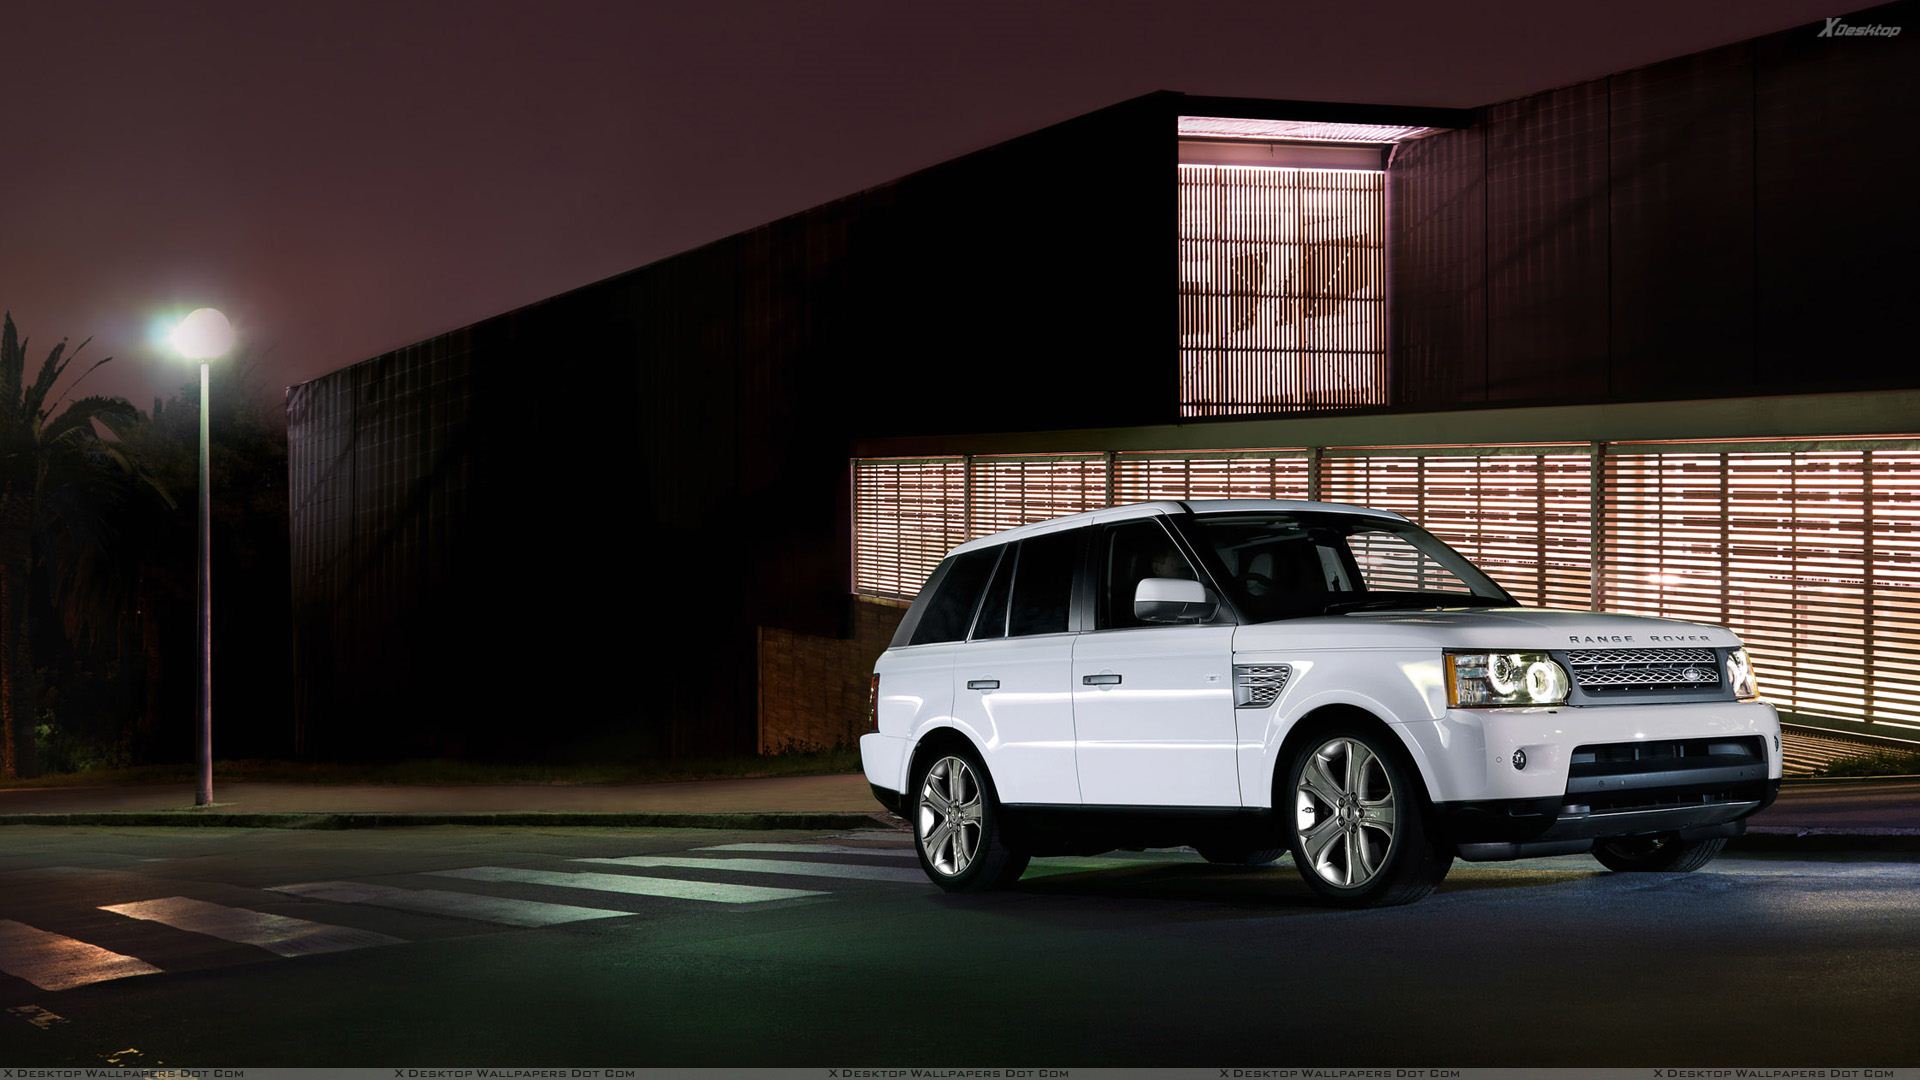 Range Rover Wallpapers, Photos & Images in HD